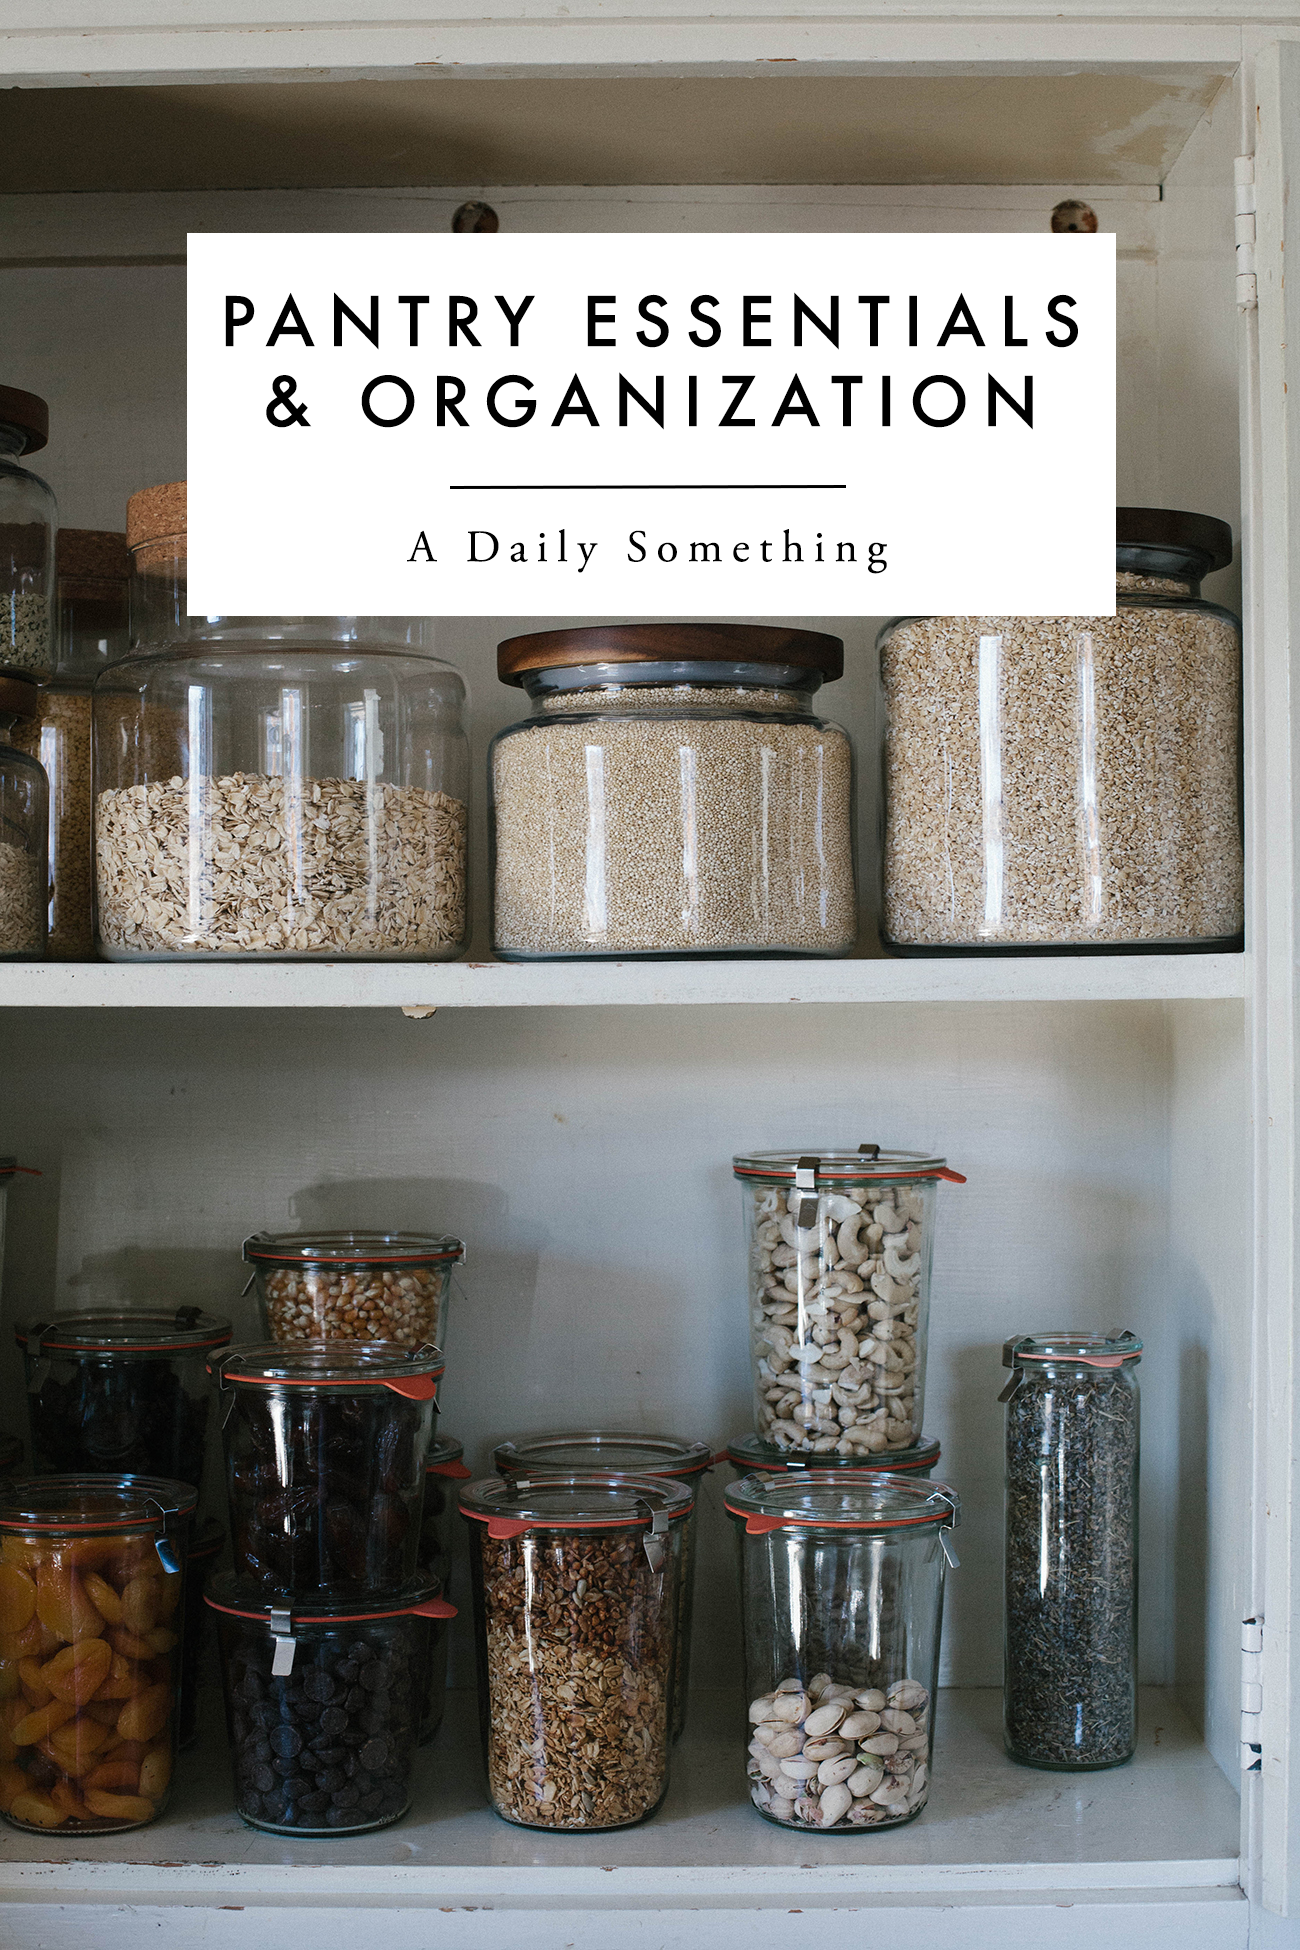 https://www.adailysomething.com/wp-content/uploads/2018/02/Pantry-Organization-Essentials.png